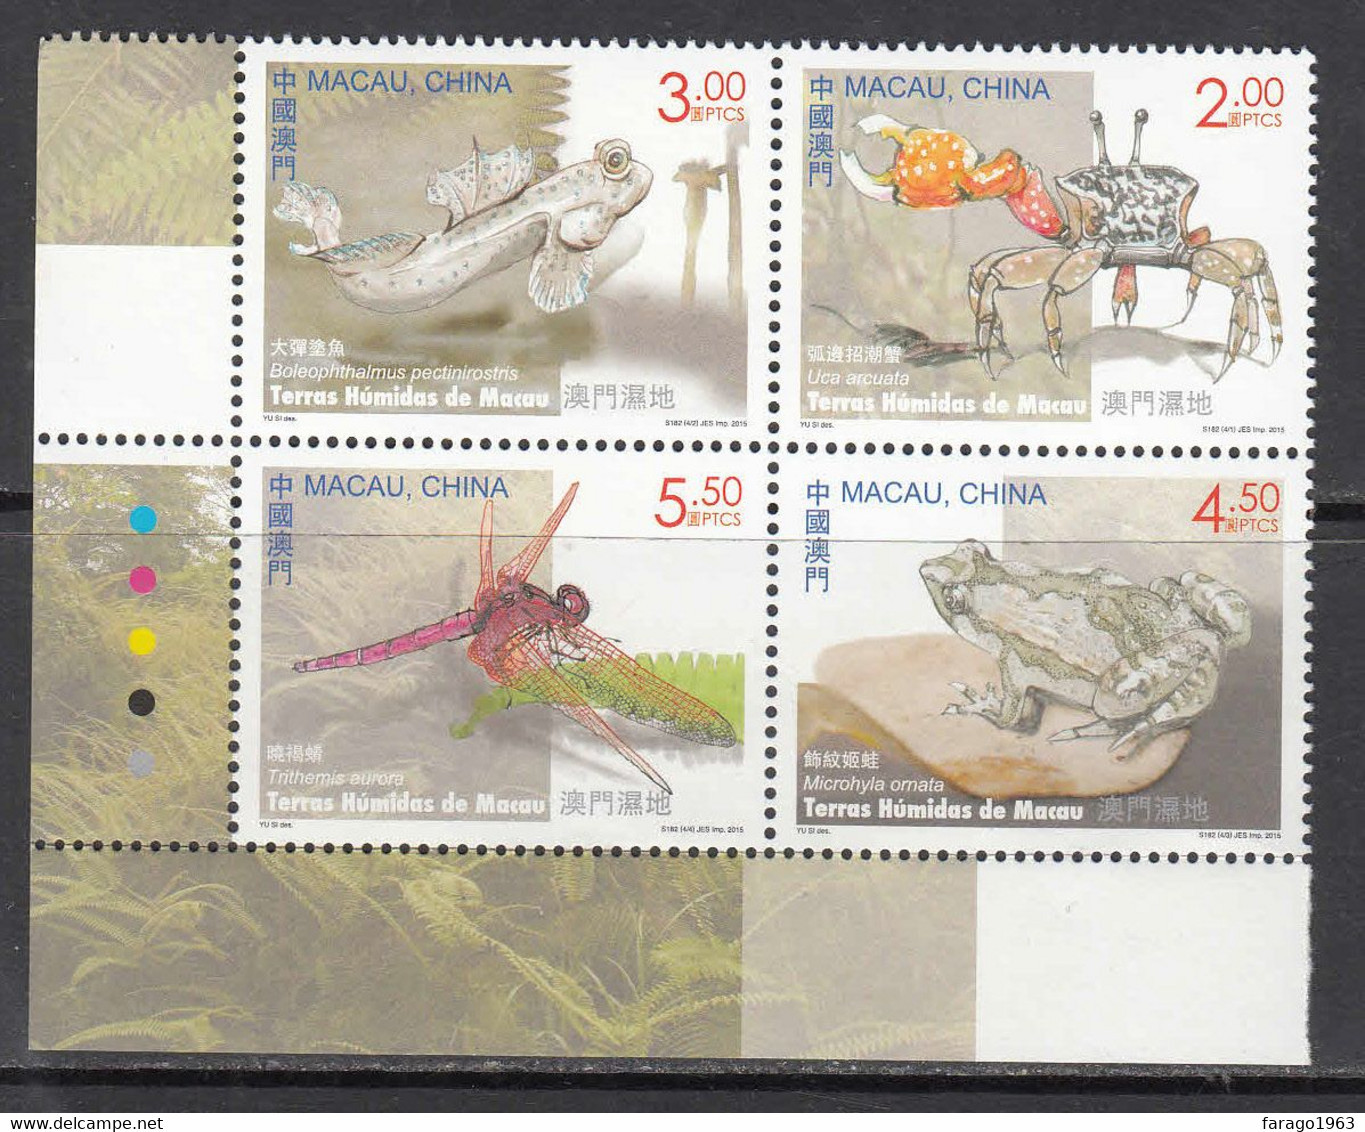 2015 Macau Wetlands Wildlife Crabs Fish Insects Frogs Complete Set Block Of 4 MNH @  FACE VALUE - Nuevos